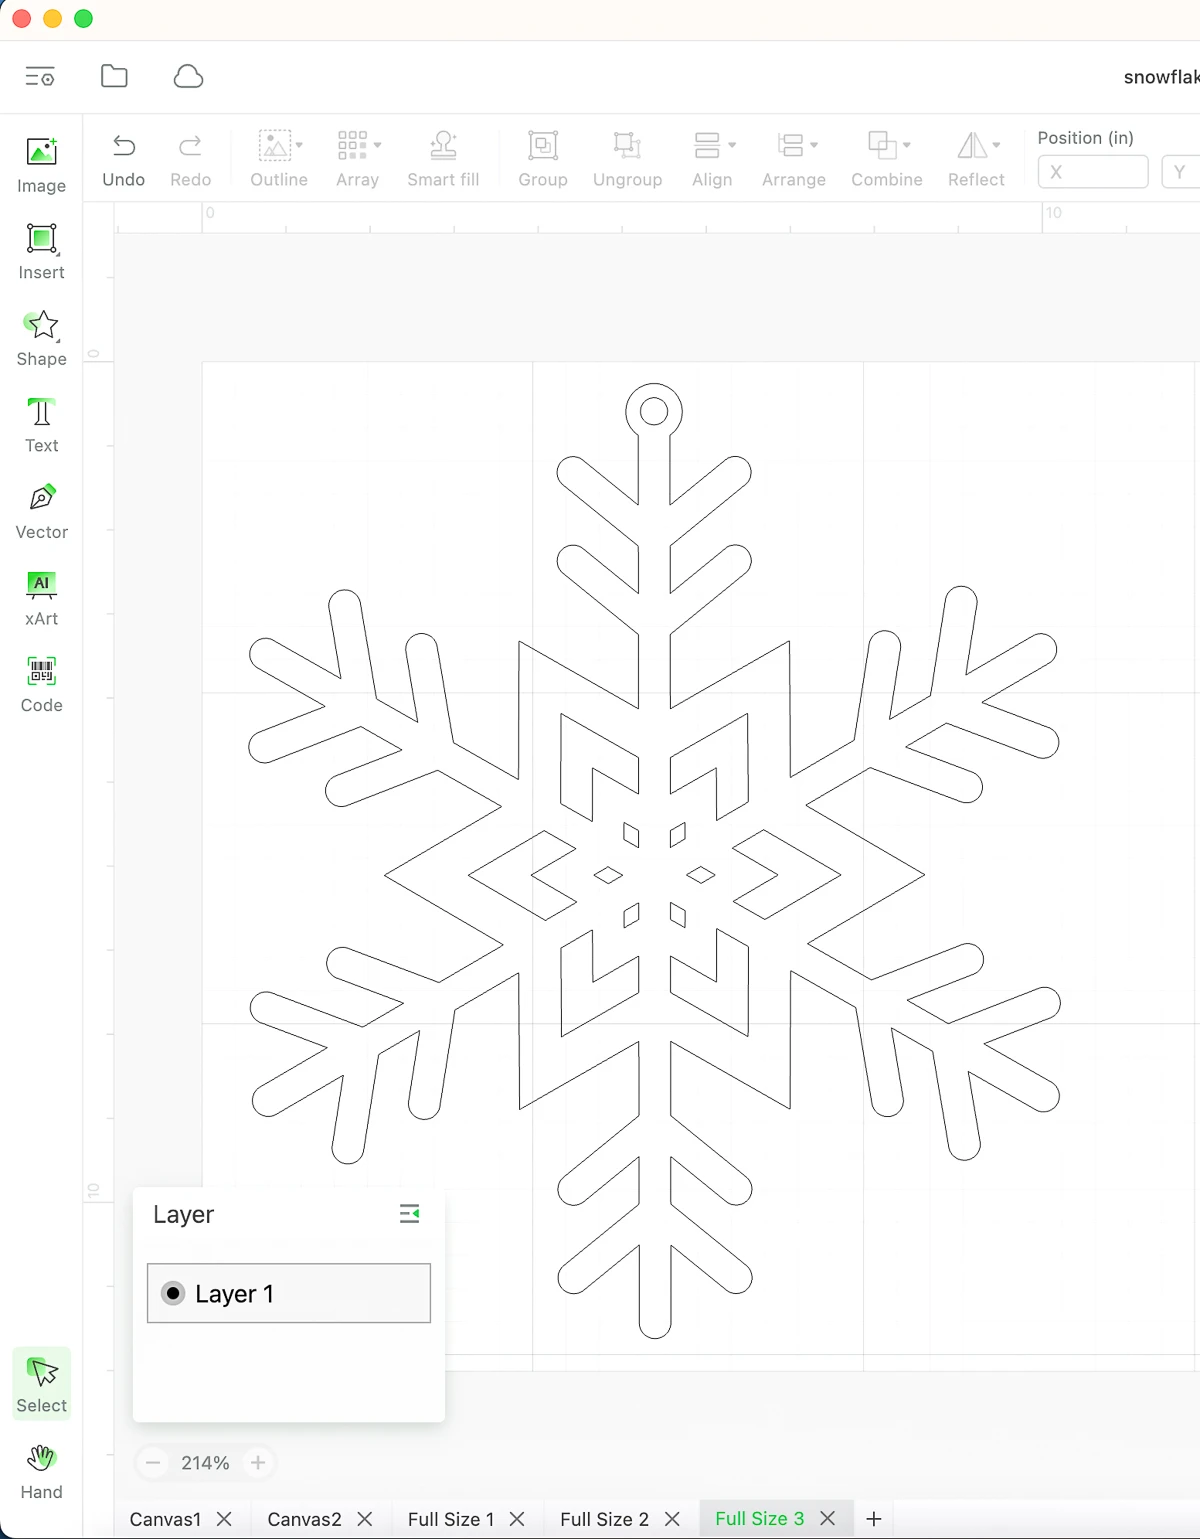 xTool Creative Space with separate canvas tabs for each snowflake design